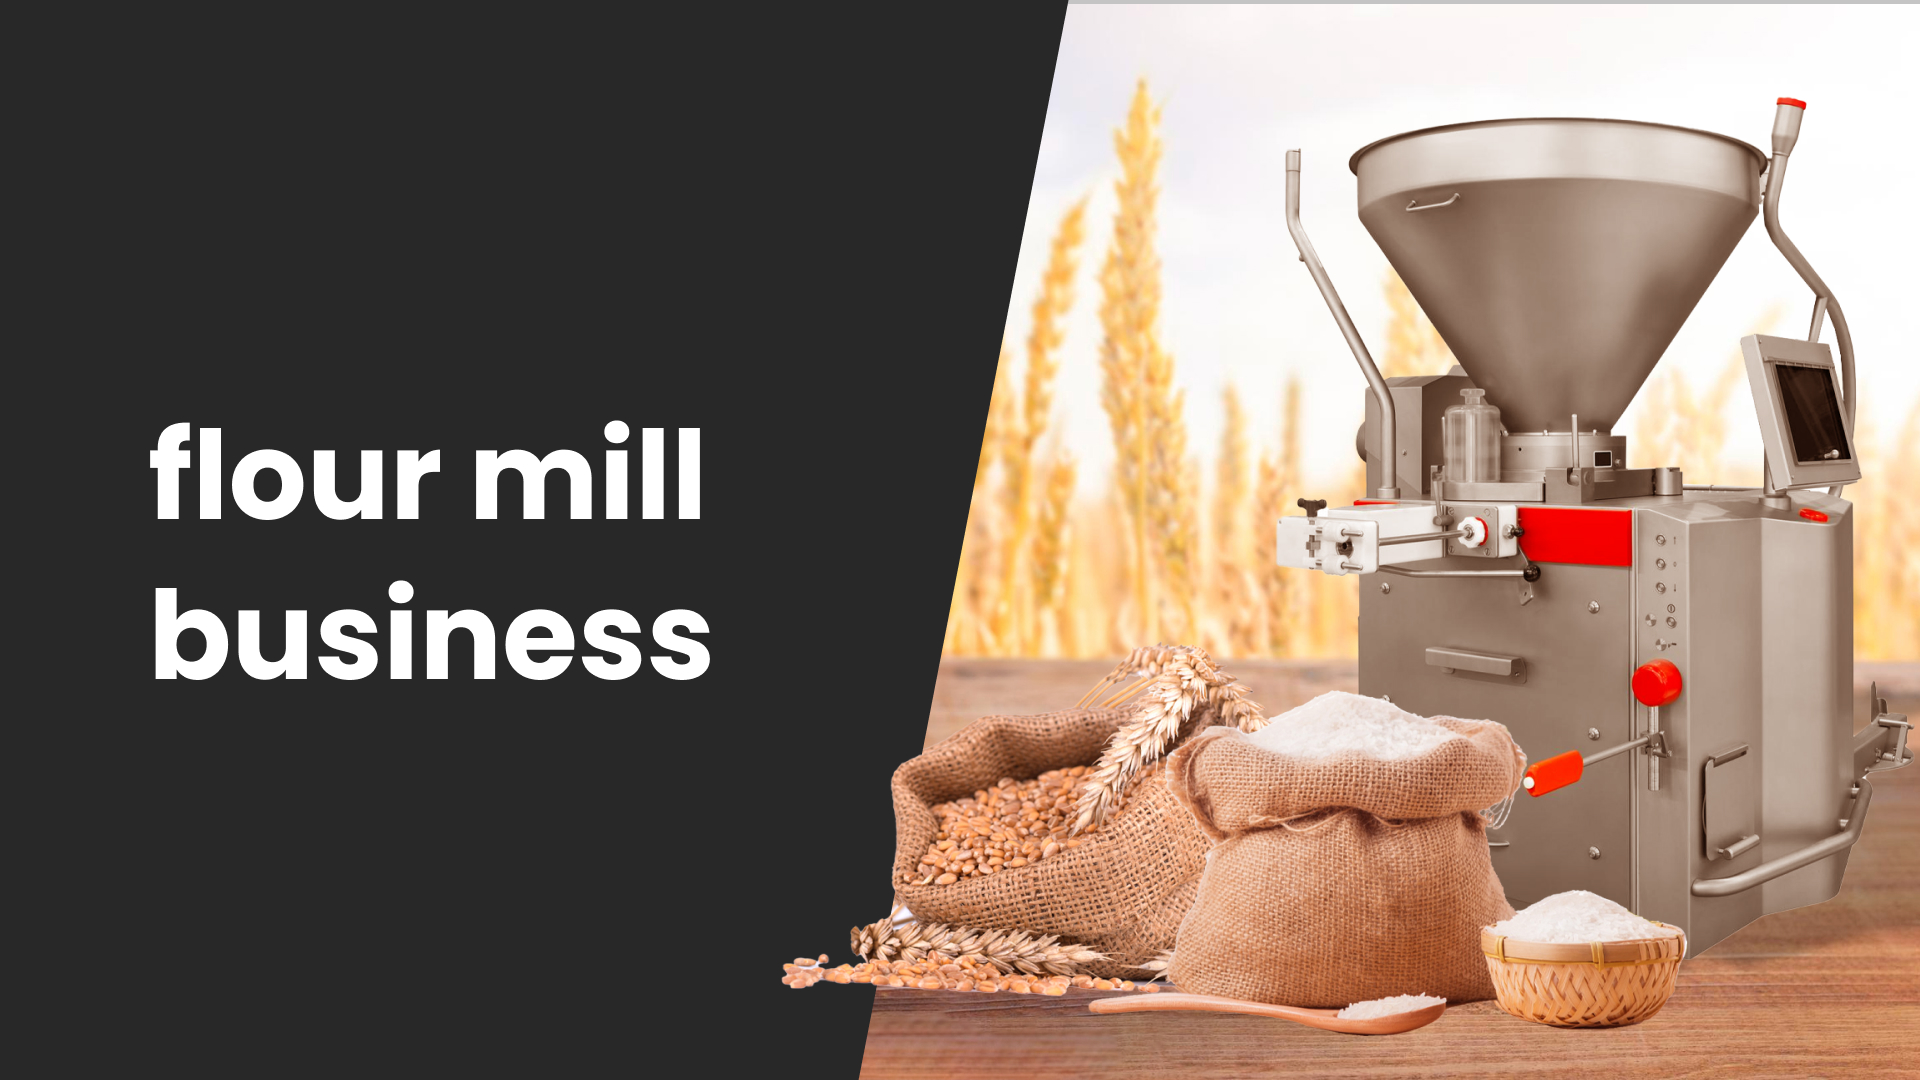 Course Trailer: Start a Successful Flour Mill Business Earn up to 8.5L Yearly/Machine. Watch to know more.